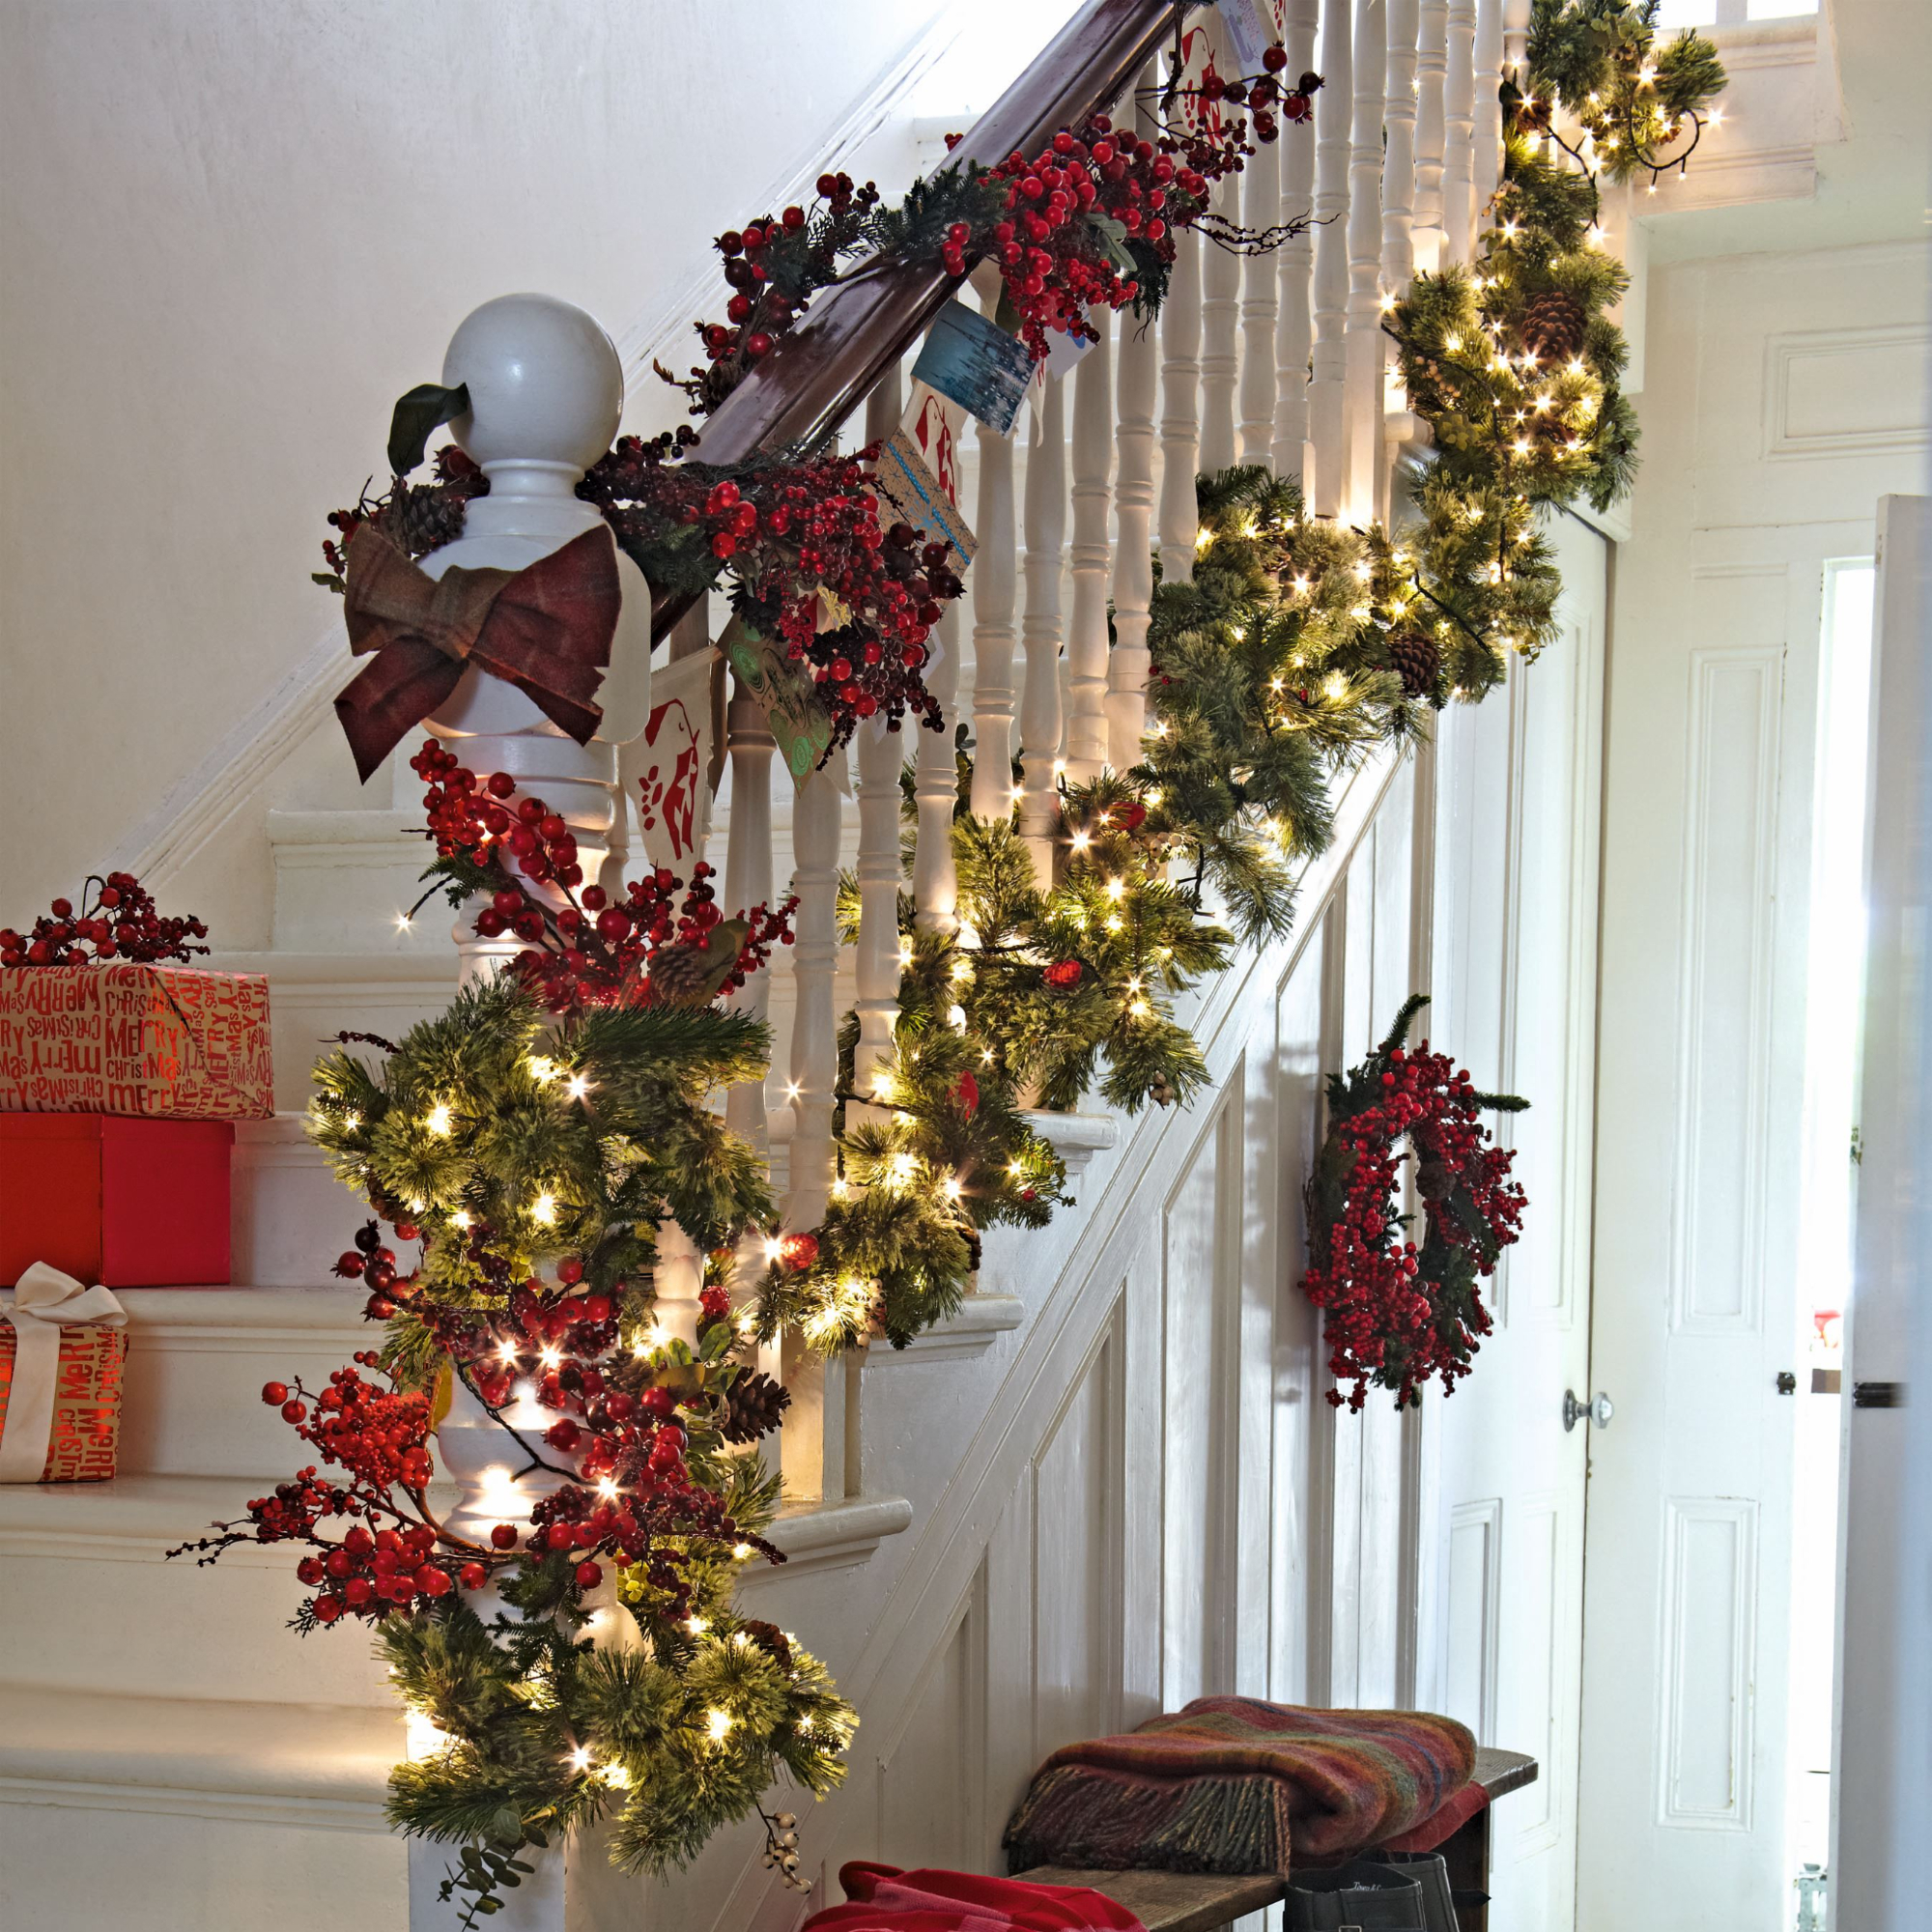 Festive hallway and staircase, period style staircase with bannisters, real fir tree foliage garland with red berries and fairy lights, art deco tiled floor, wooden bech with scarves and wellies, berry wreath, cupboard under stairs